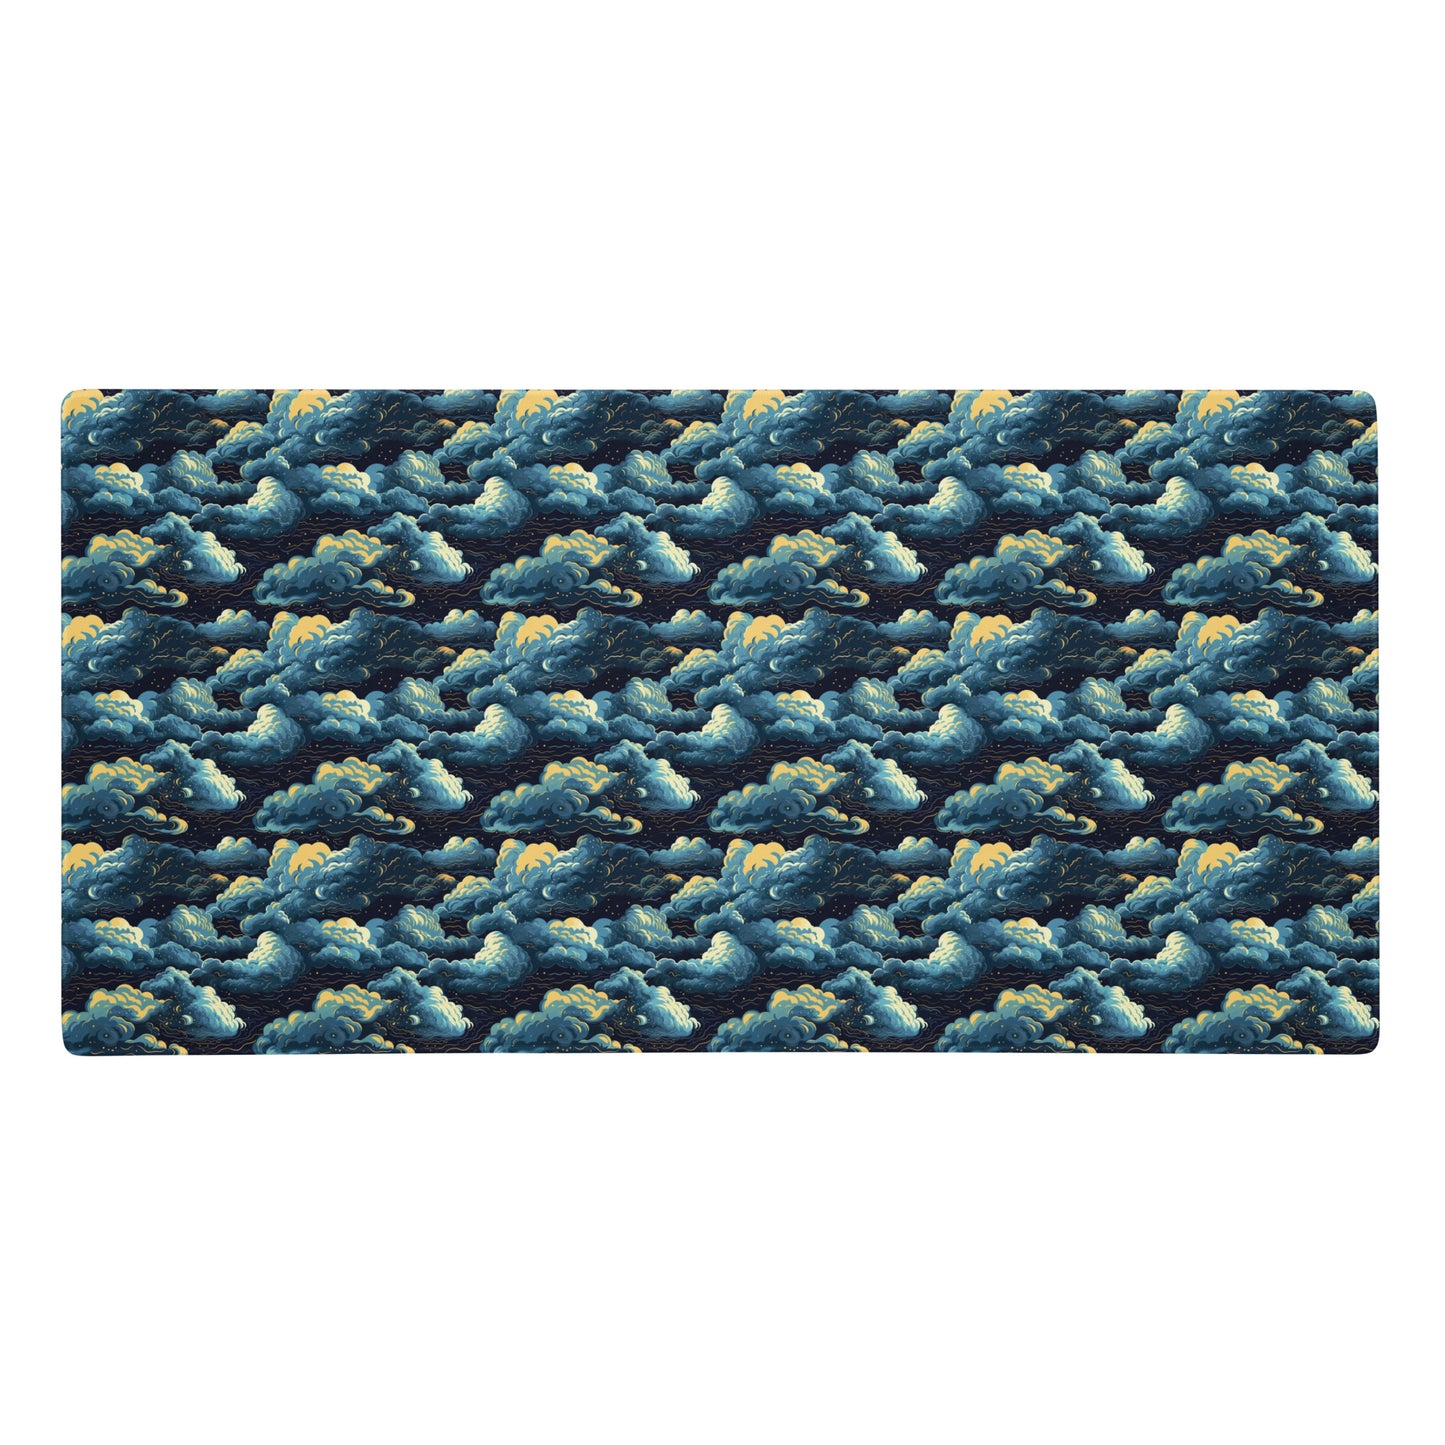 A 36" x 18" desk pad with a cloudy night sky pattern.